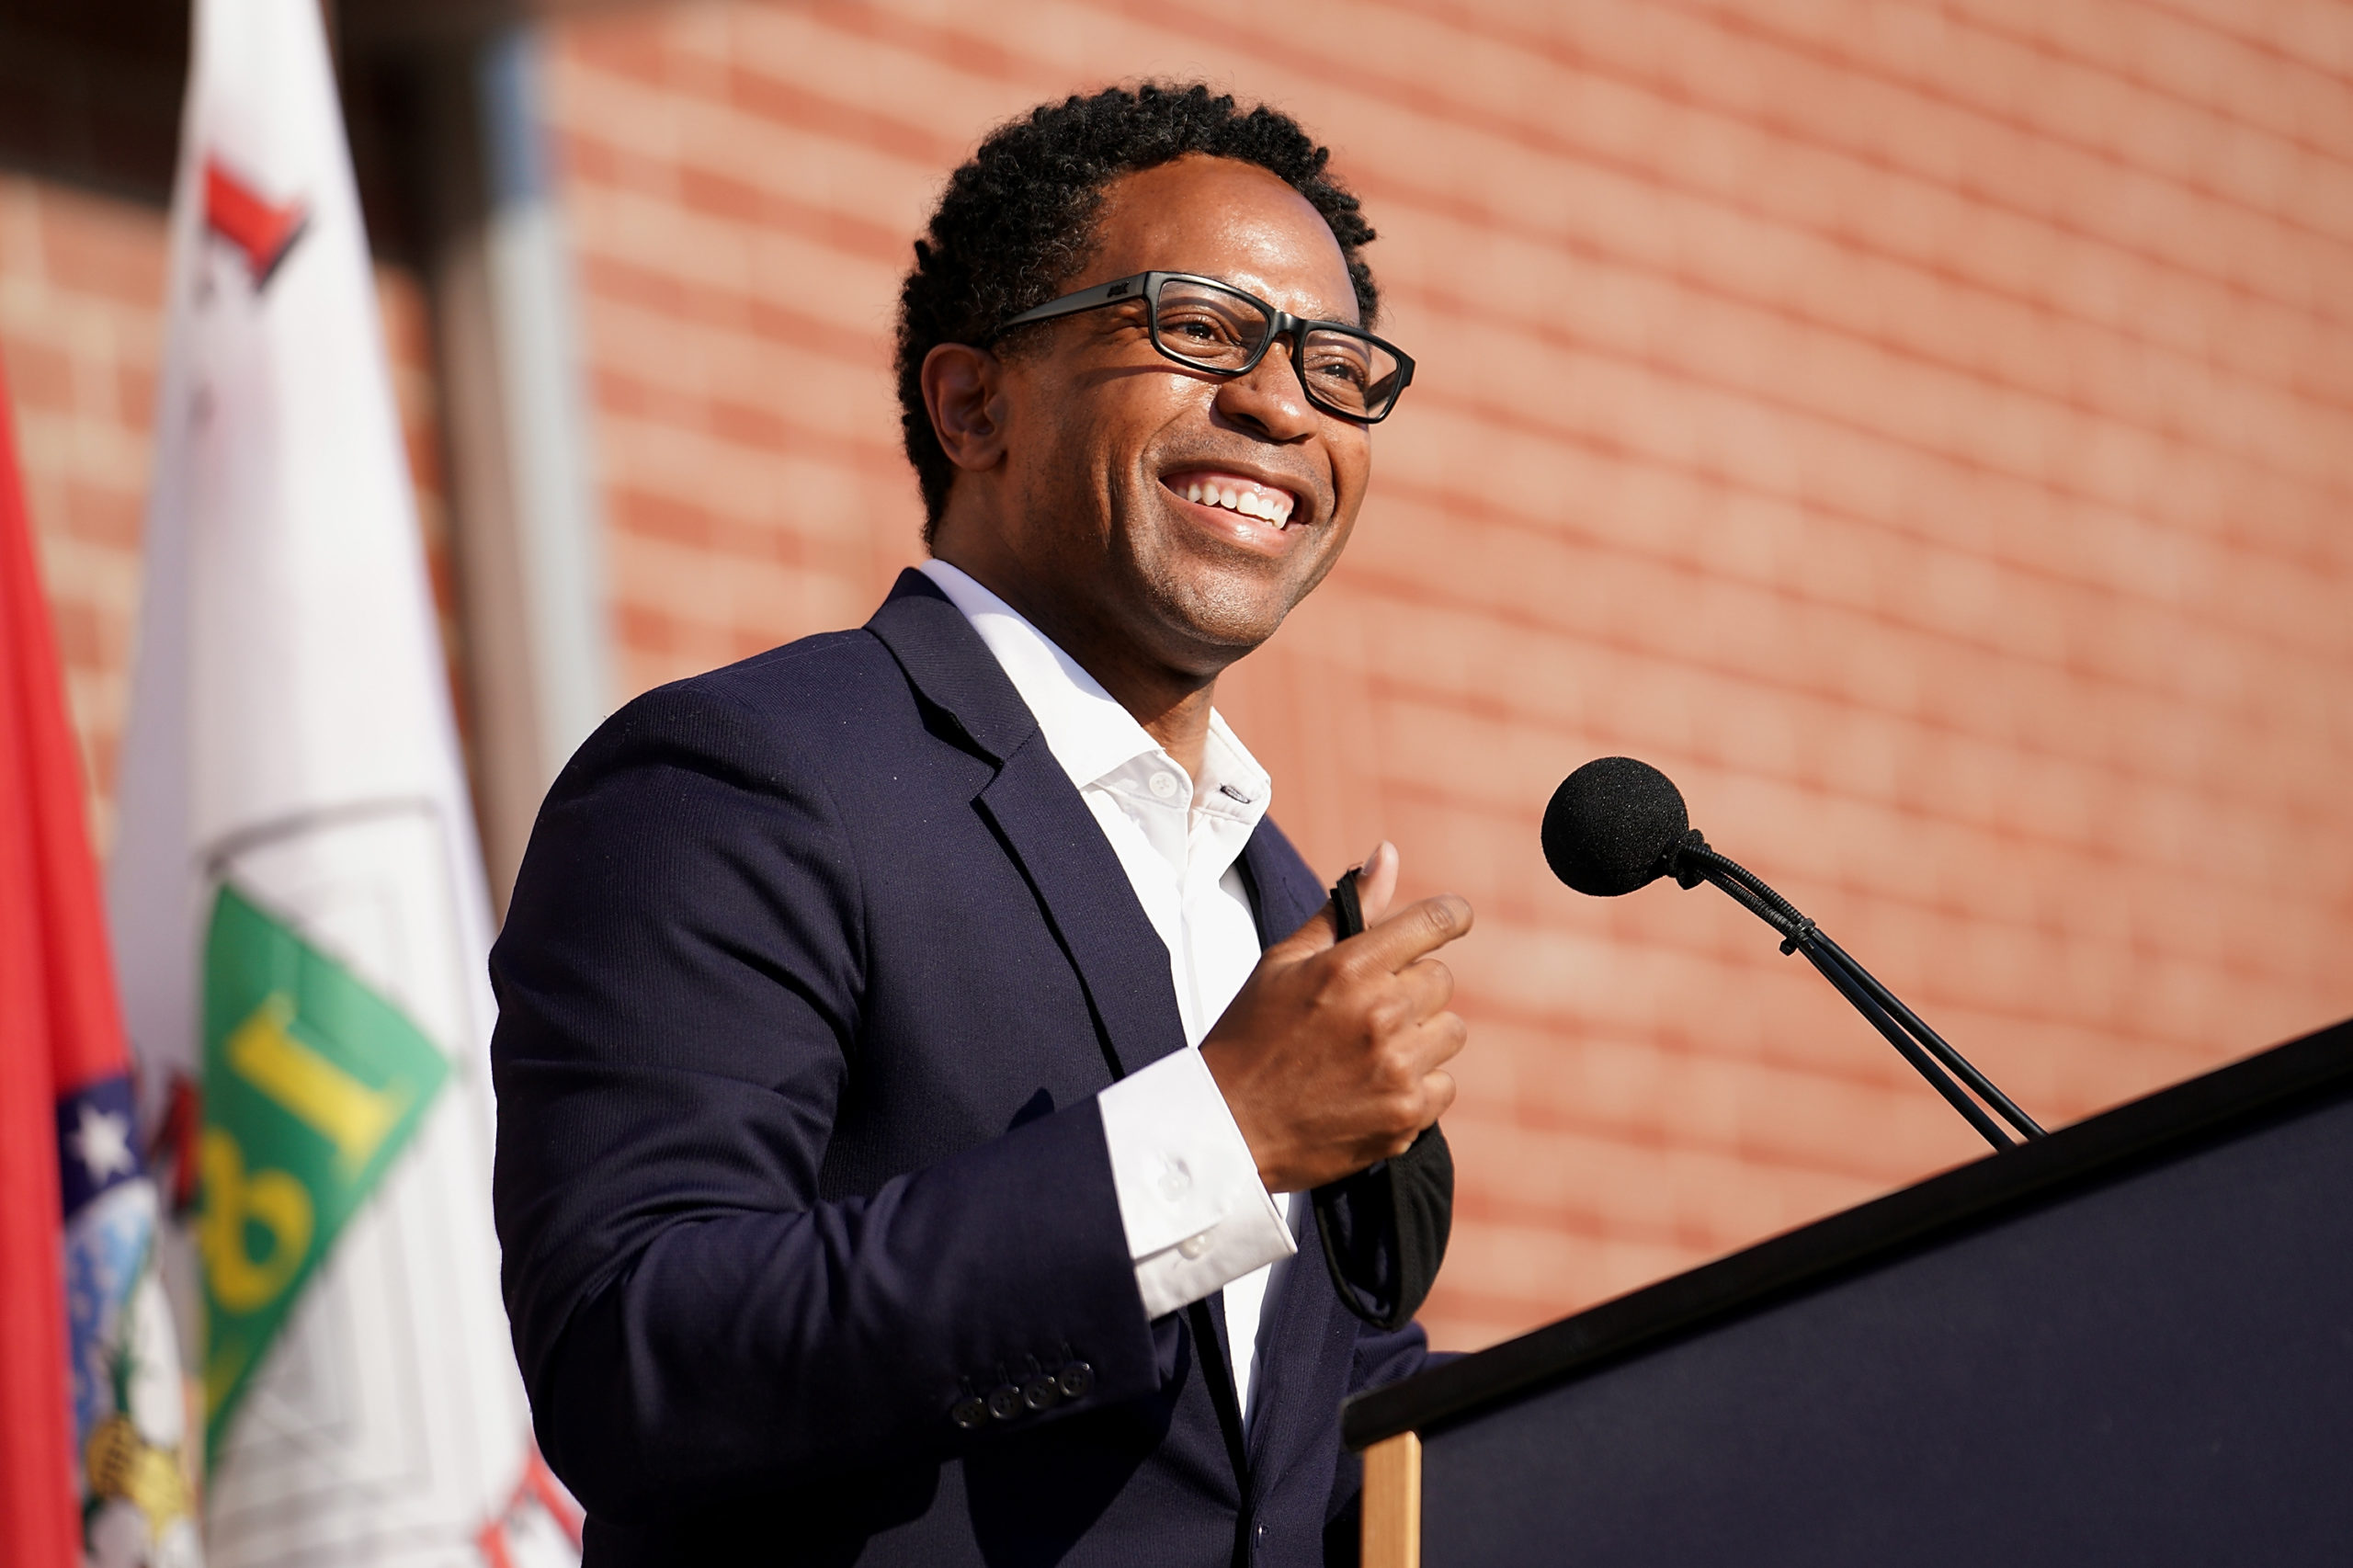 FERGUSON, MO - JUNE 17: St. Louis County Prosecutor, Wesley Bell gives remarks during the Ferguson mayoral inauguration ceremony for Ella James at the Urban League Empowerment Center on June 17, 2020 in Ferguson, Missouri. Ella Jones becomes the city's first African-American Mayor in it's 165-year history. (Photo by Michael B. Thomas/Getty Images)